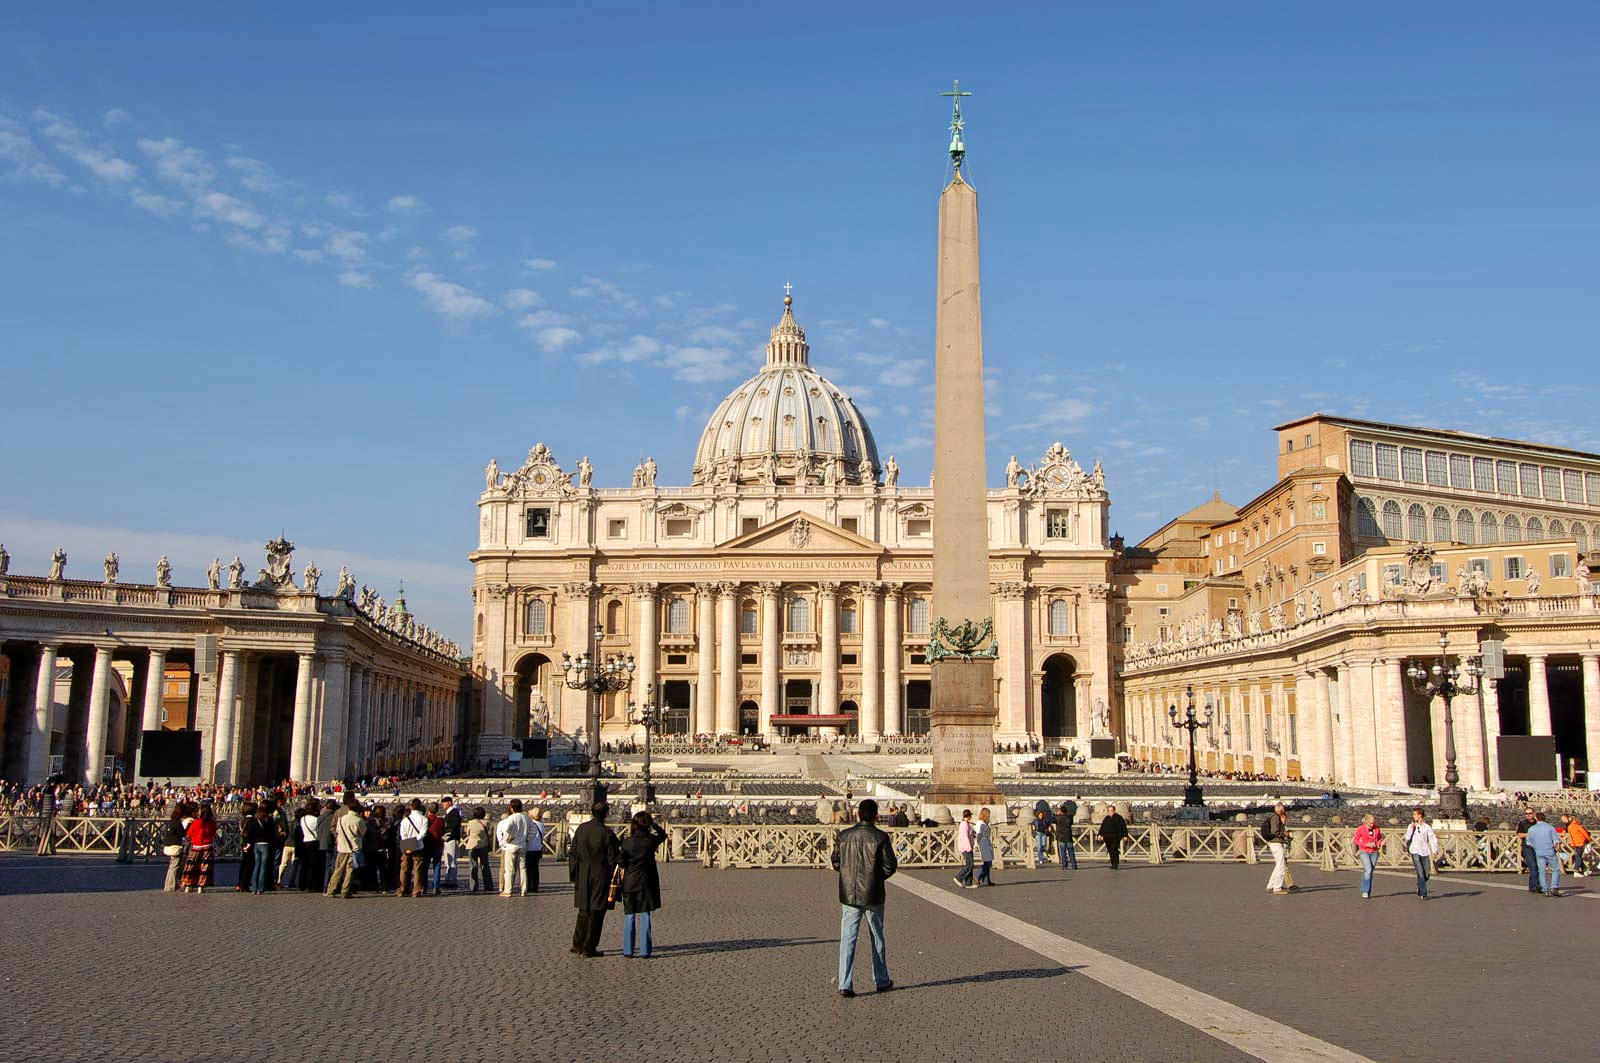 St. Peter’s Square Overview